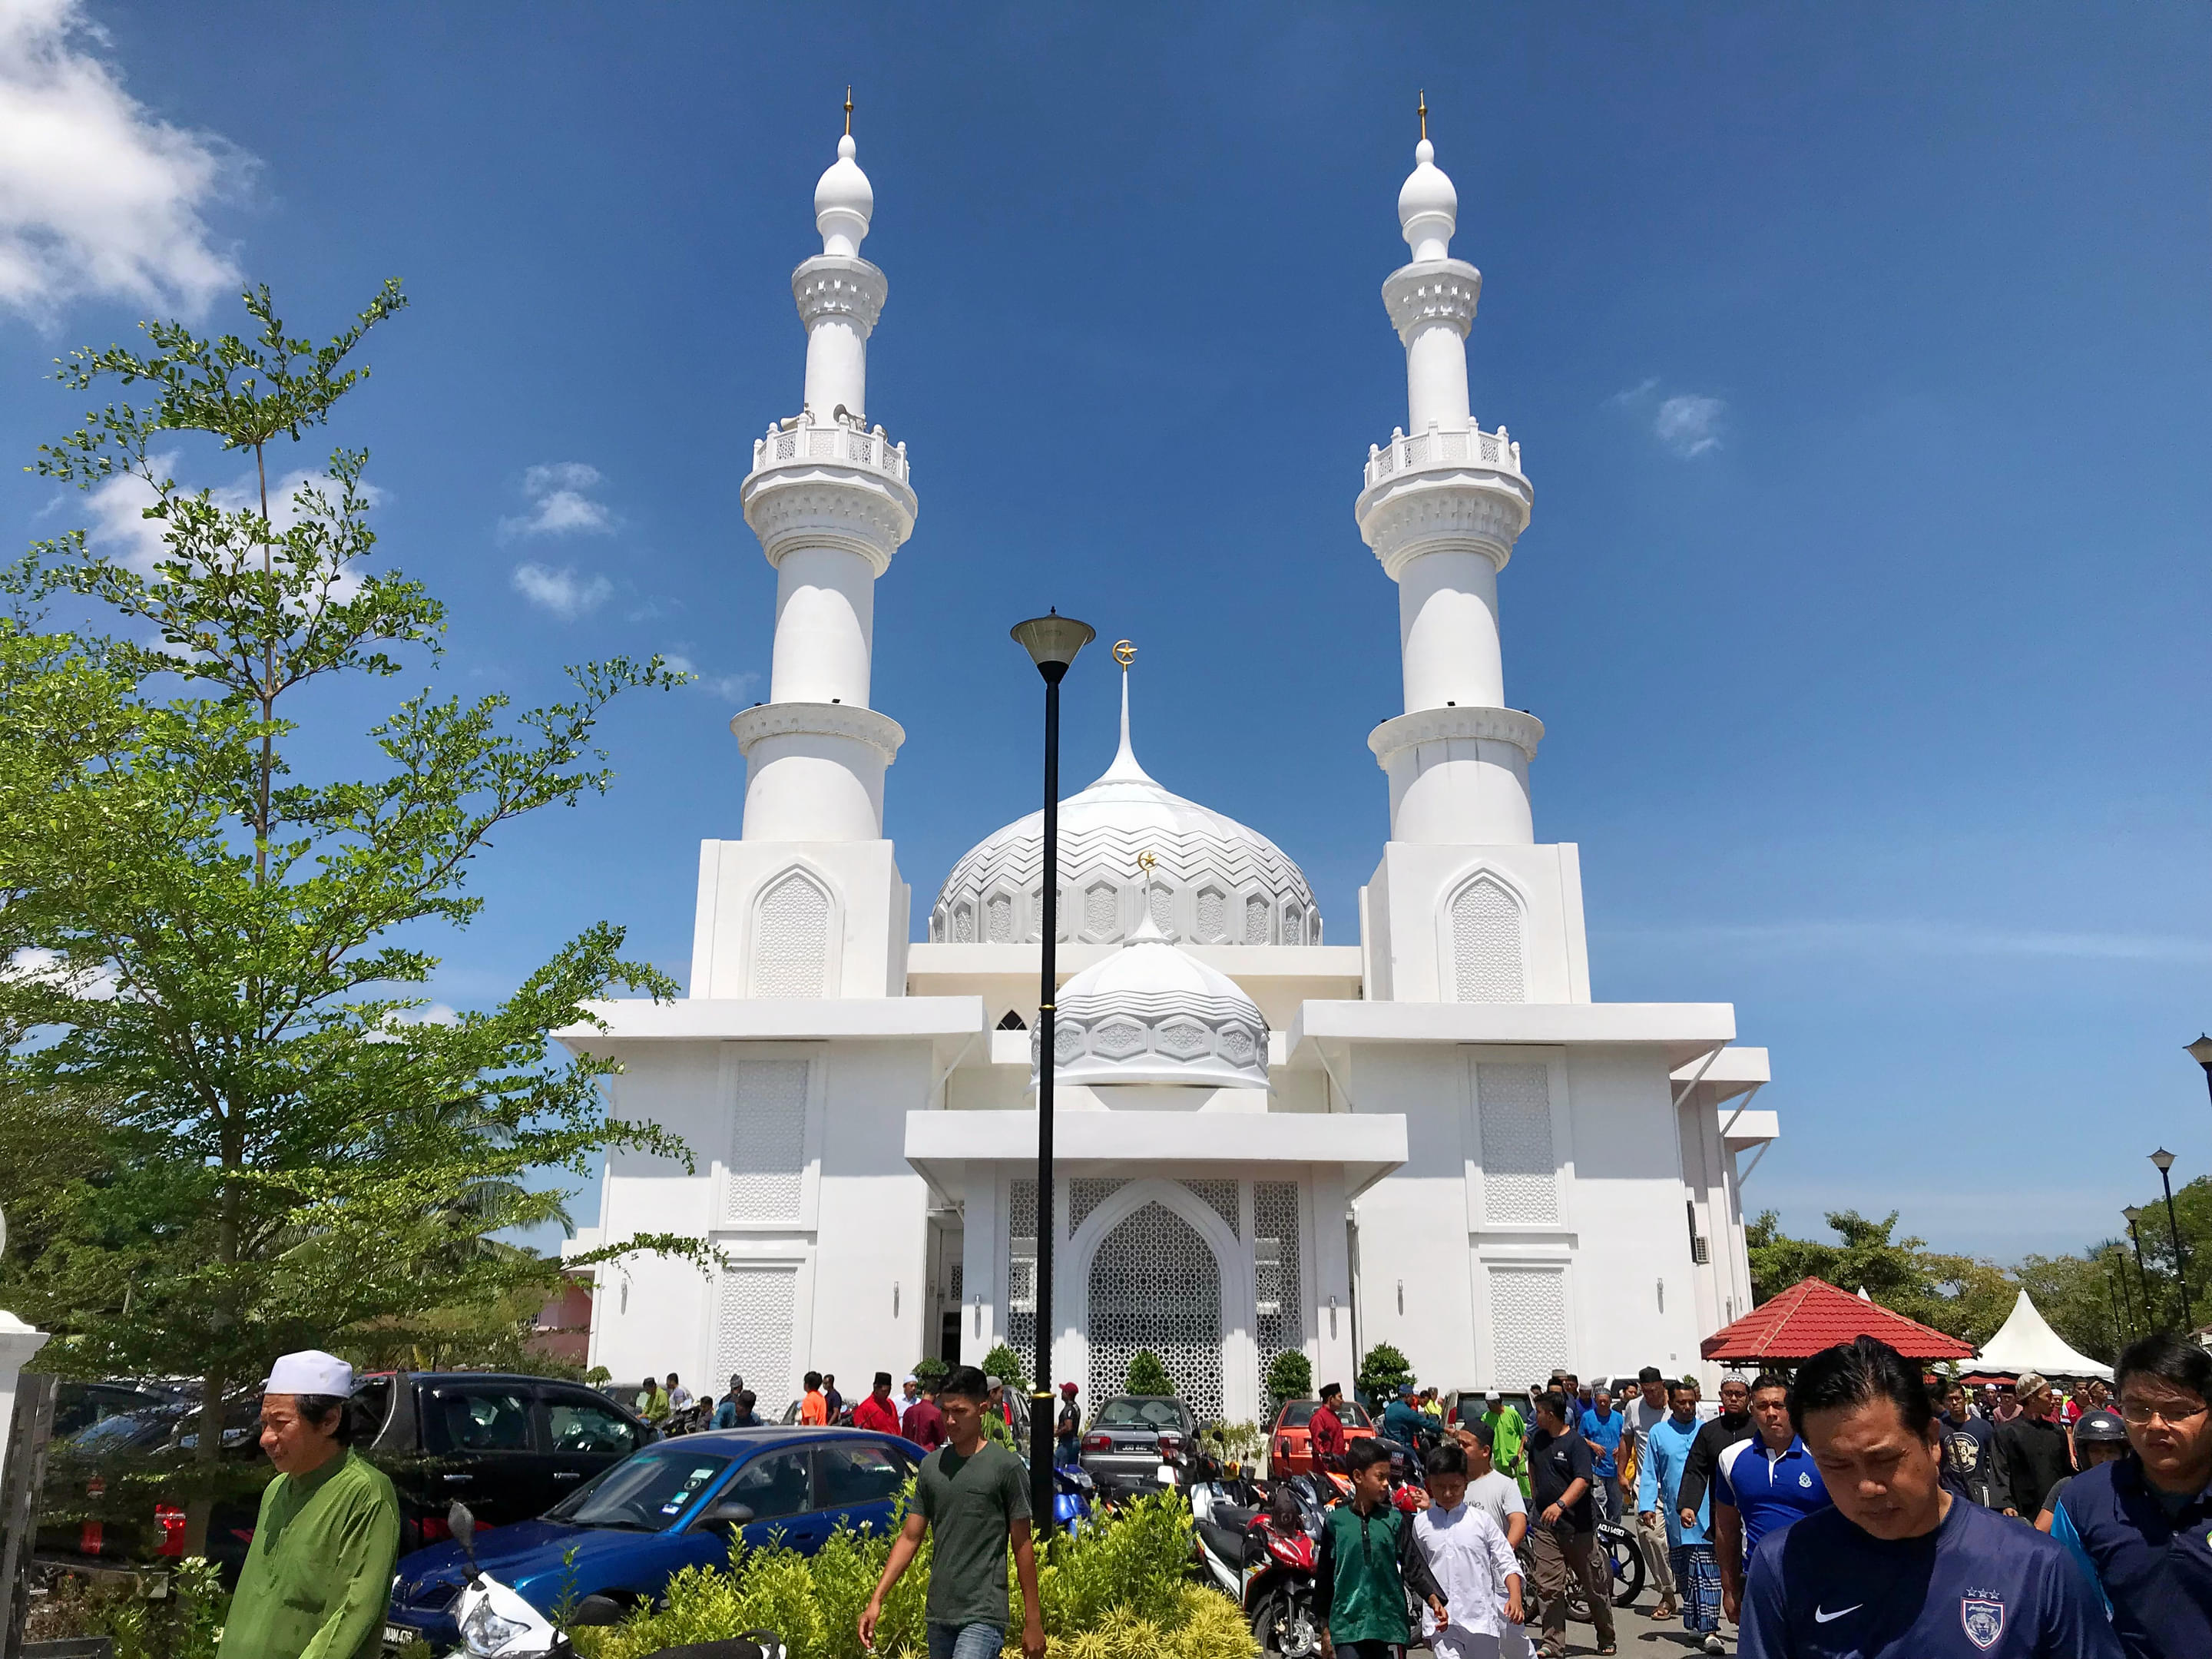 Masjid Tanah Overview